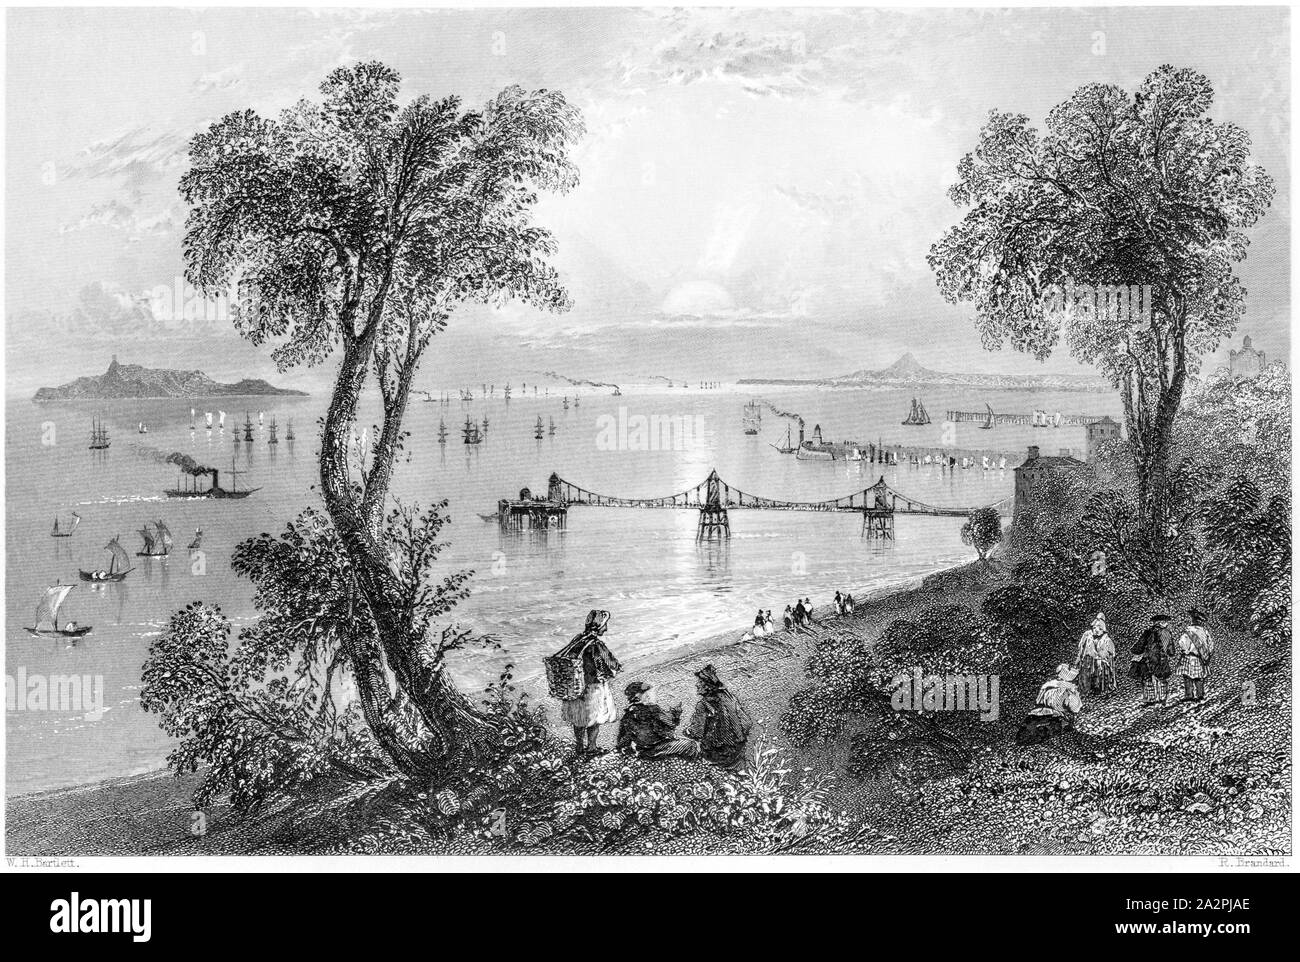 An engraving of Newhaven Pier, Firth of Forth scanned at high resolution from a book printed in 1842.  Believed copyright free. Stock Photo